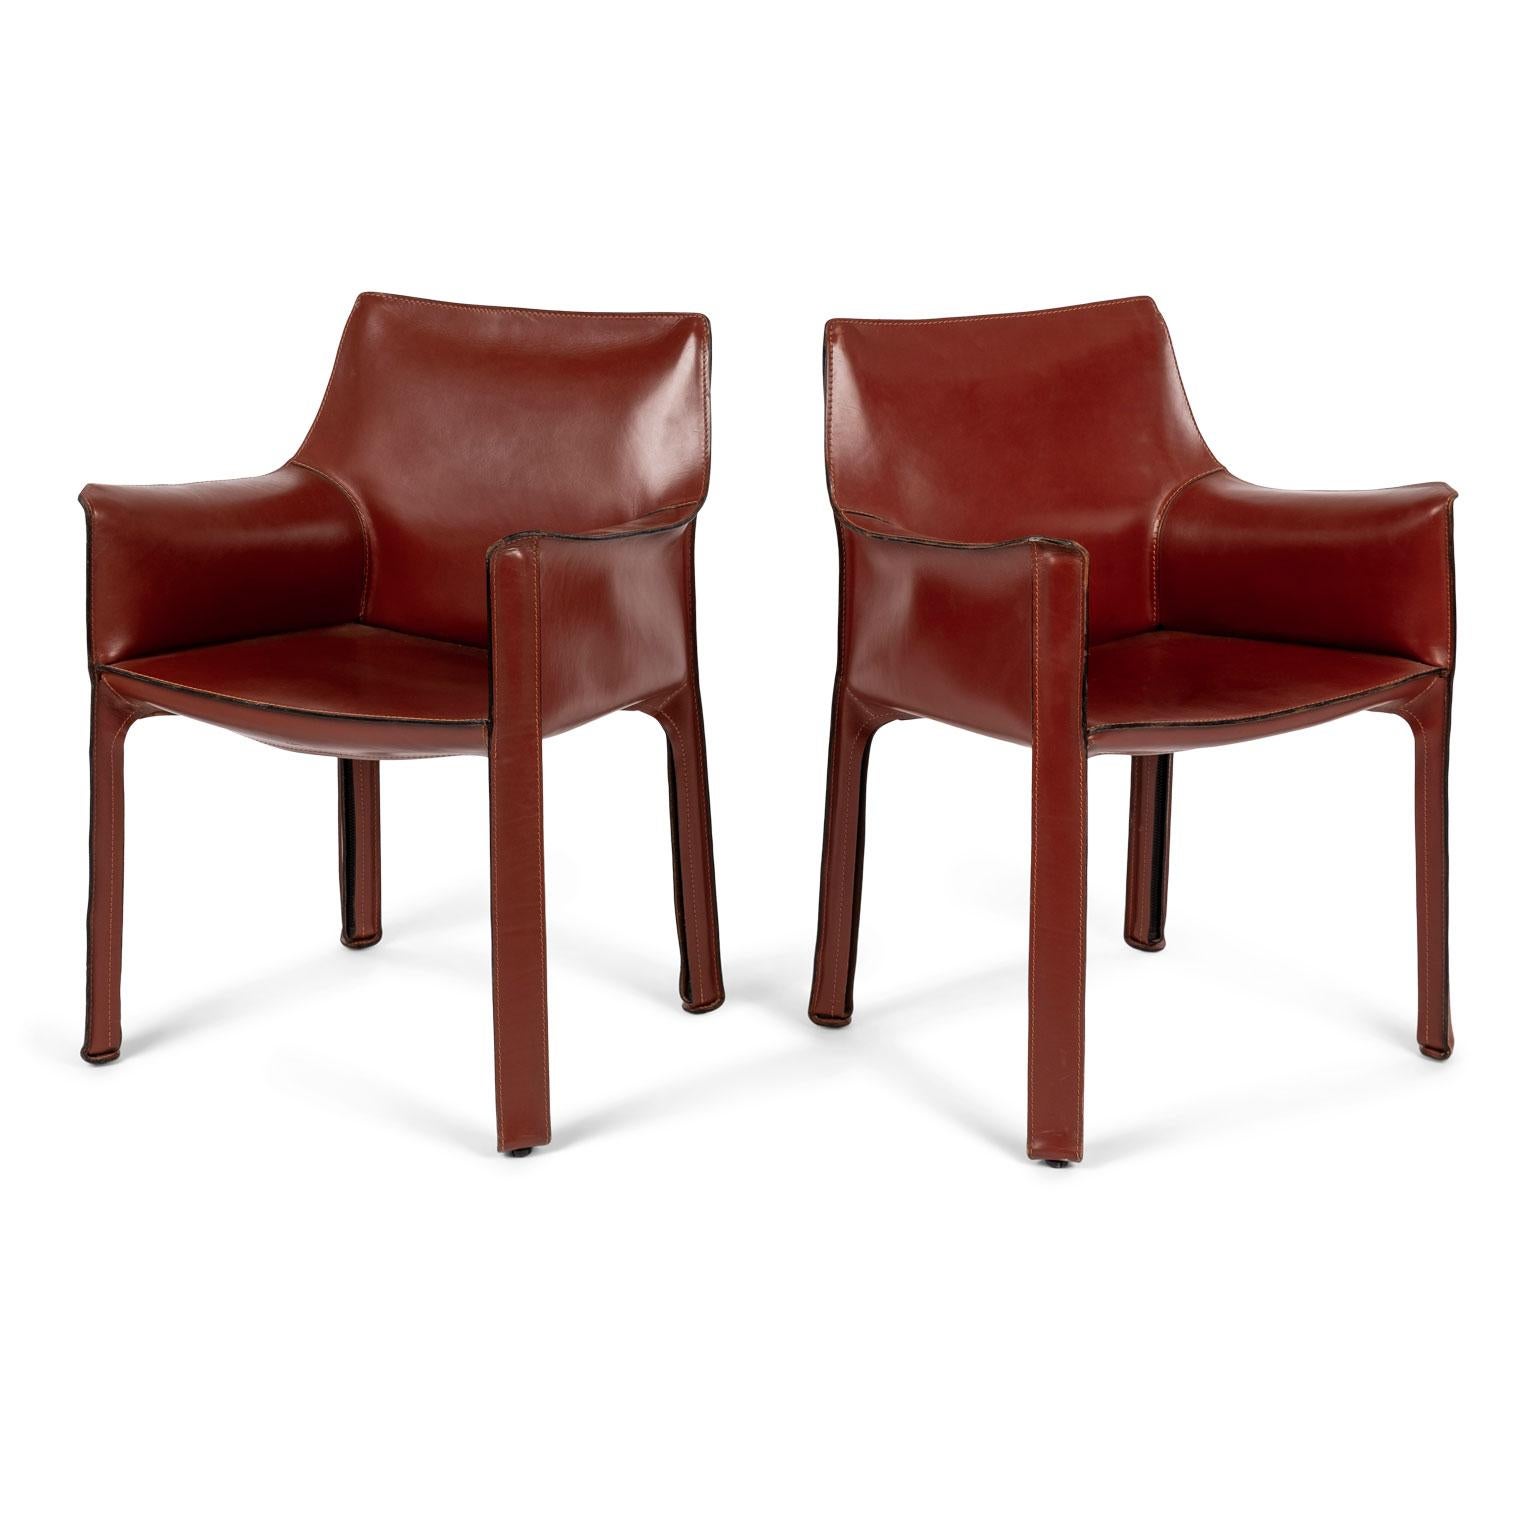 Four Mario Bellini Cab 413 armchairs in Rosso Cina finish, fabricated by Cassina in the 1980s. Flexible steel frame covered with a skin of high quality saddle leather. This elegant, versatile chair is equally suitable for the dining room, study or